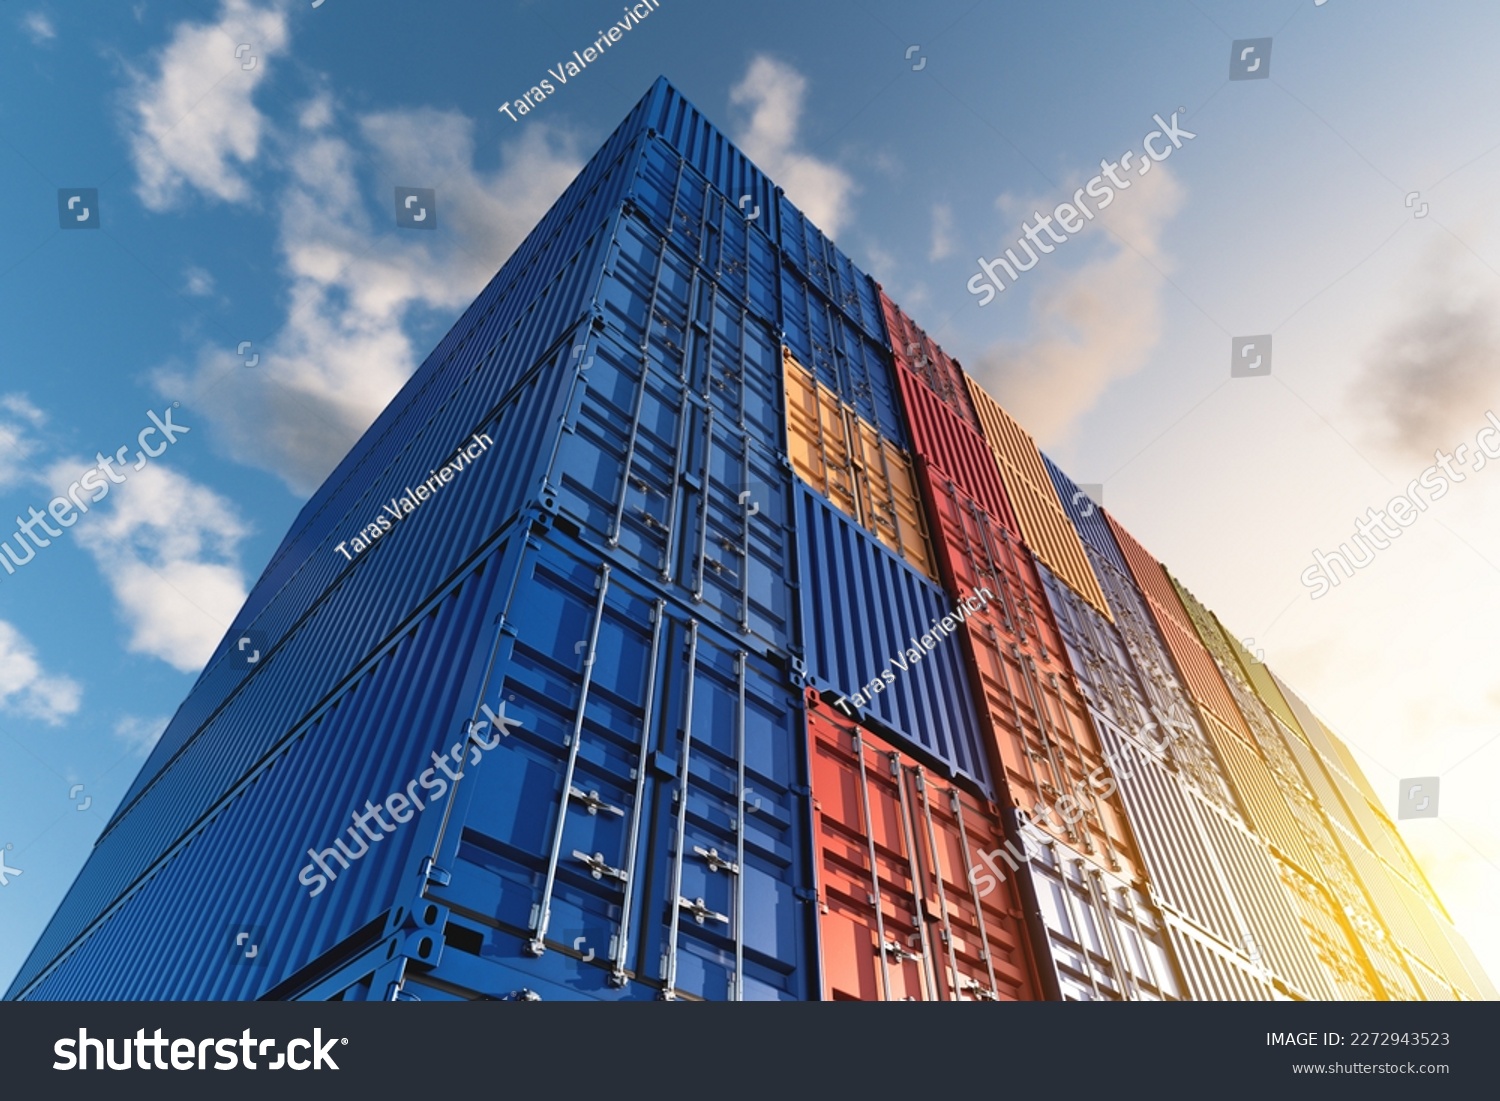 Warehouse of stacked cargo standard containers for temporary storage, loading, unloading and sorting at the container point. The concept of cargo transportation. #2272943523